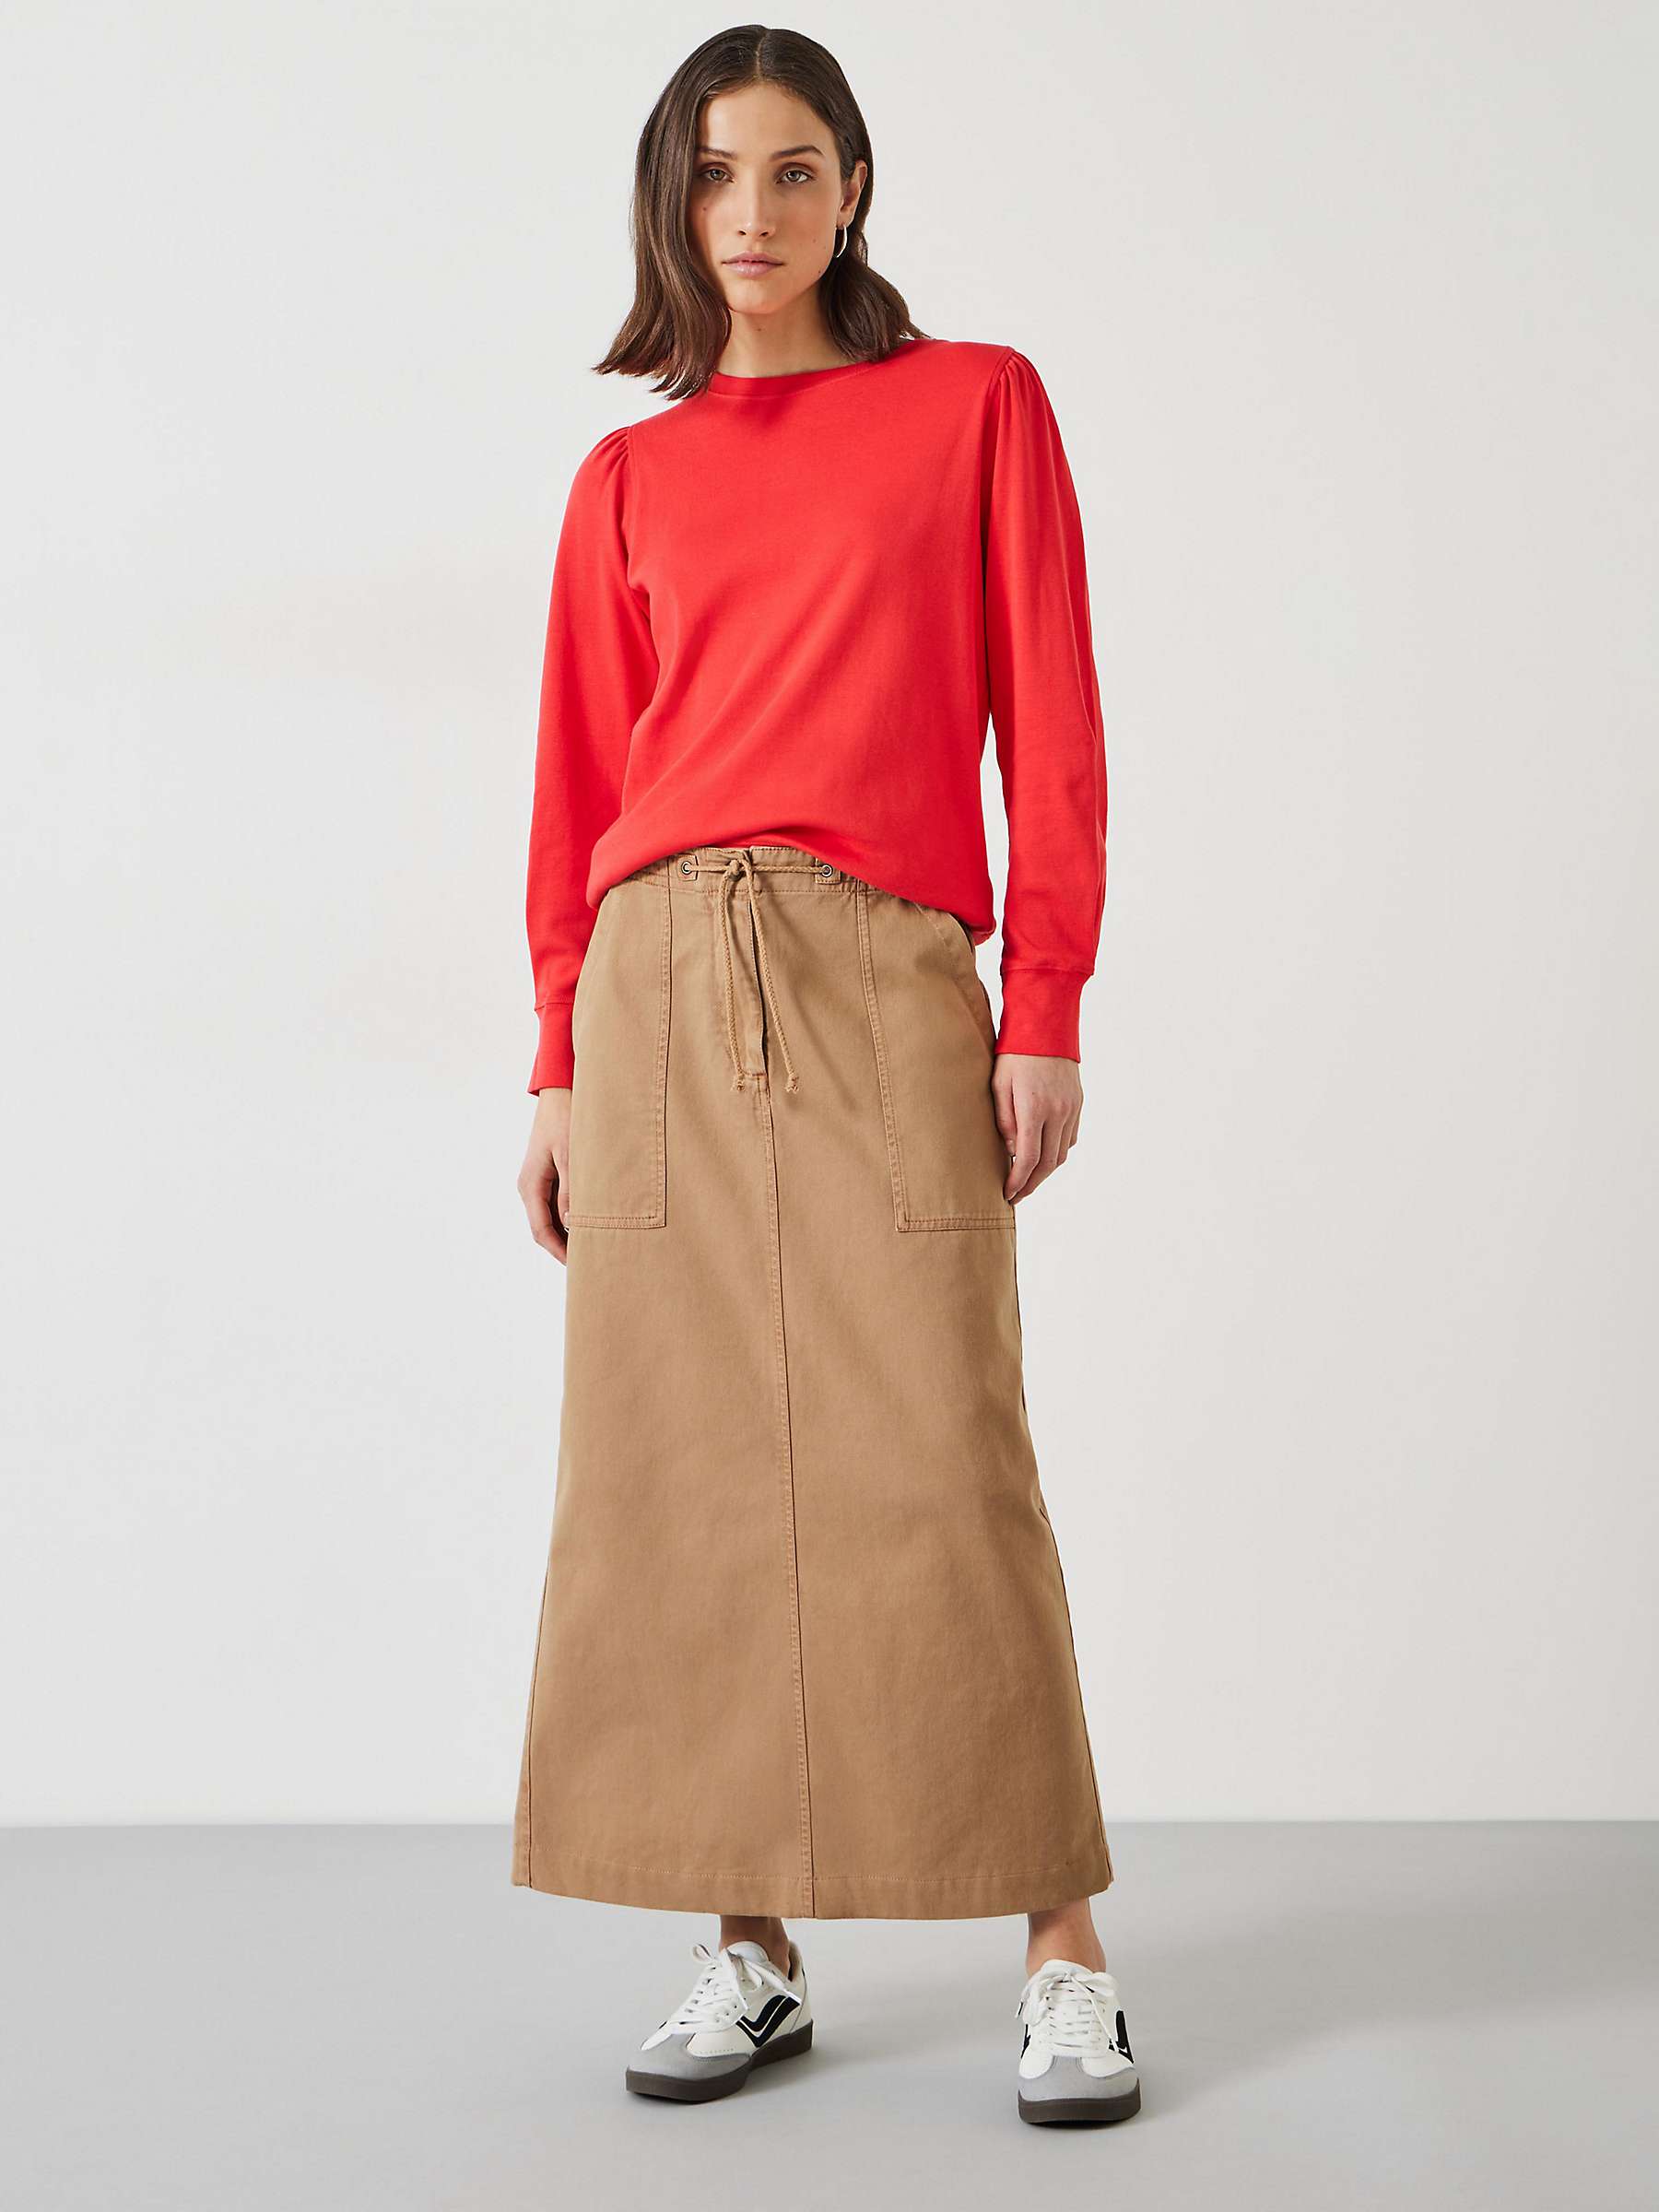 Buy HUSH Emily Puff Sleeve Cotton Jersey Top Online at johnlewis.com